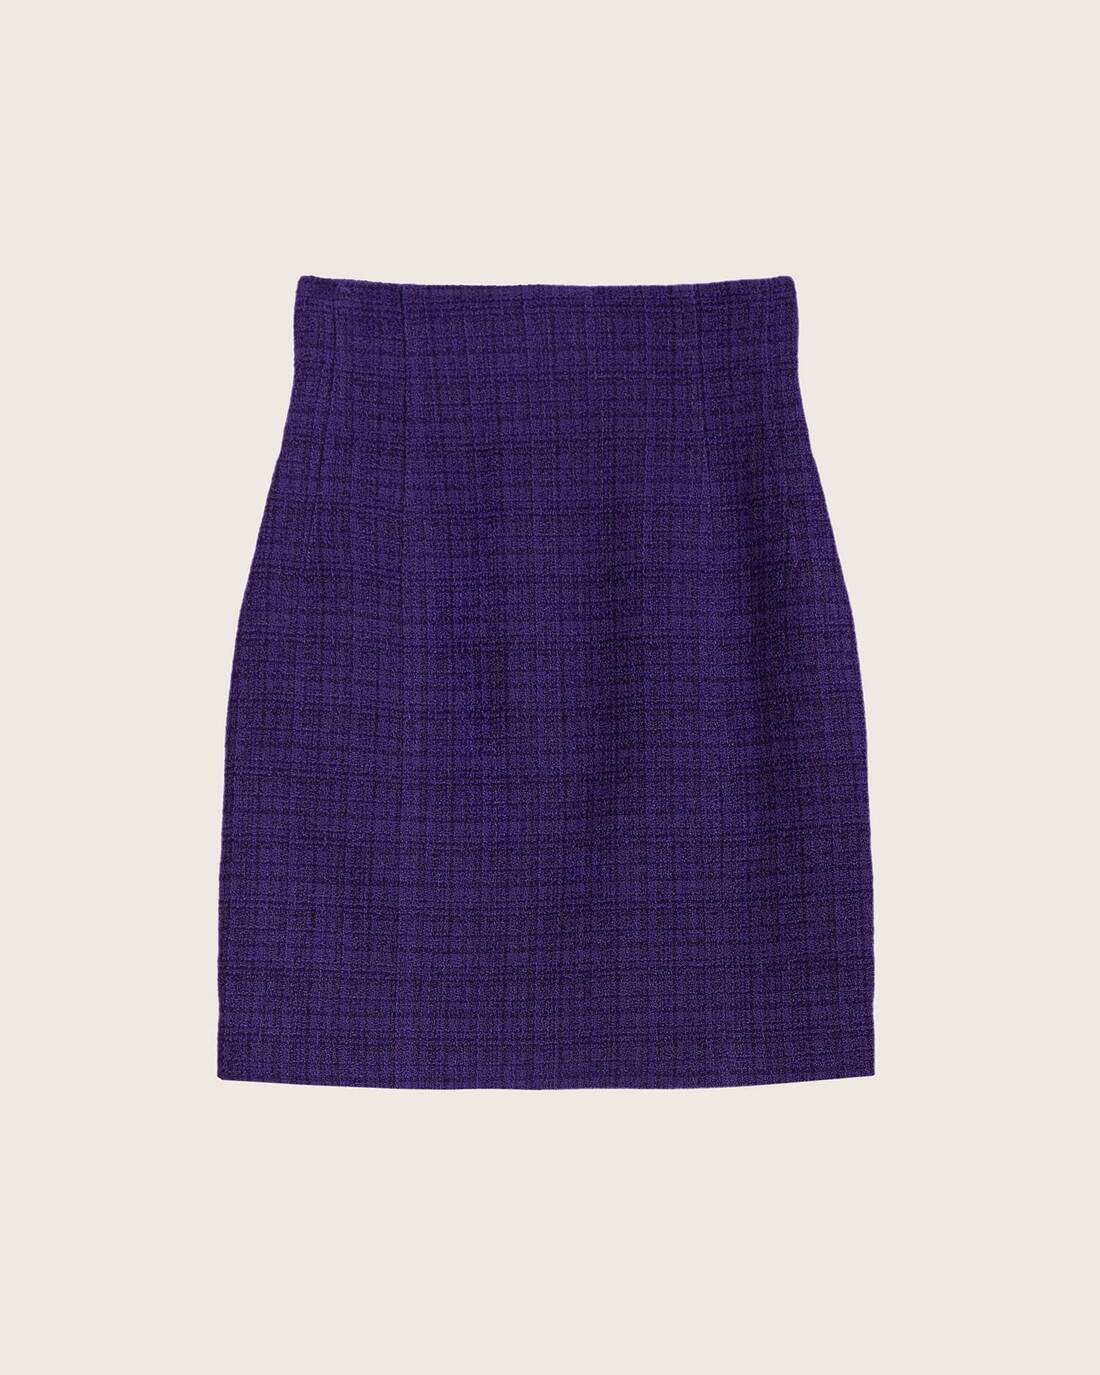 Textured skirt with darts